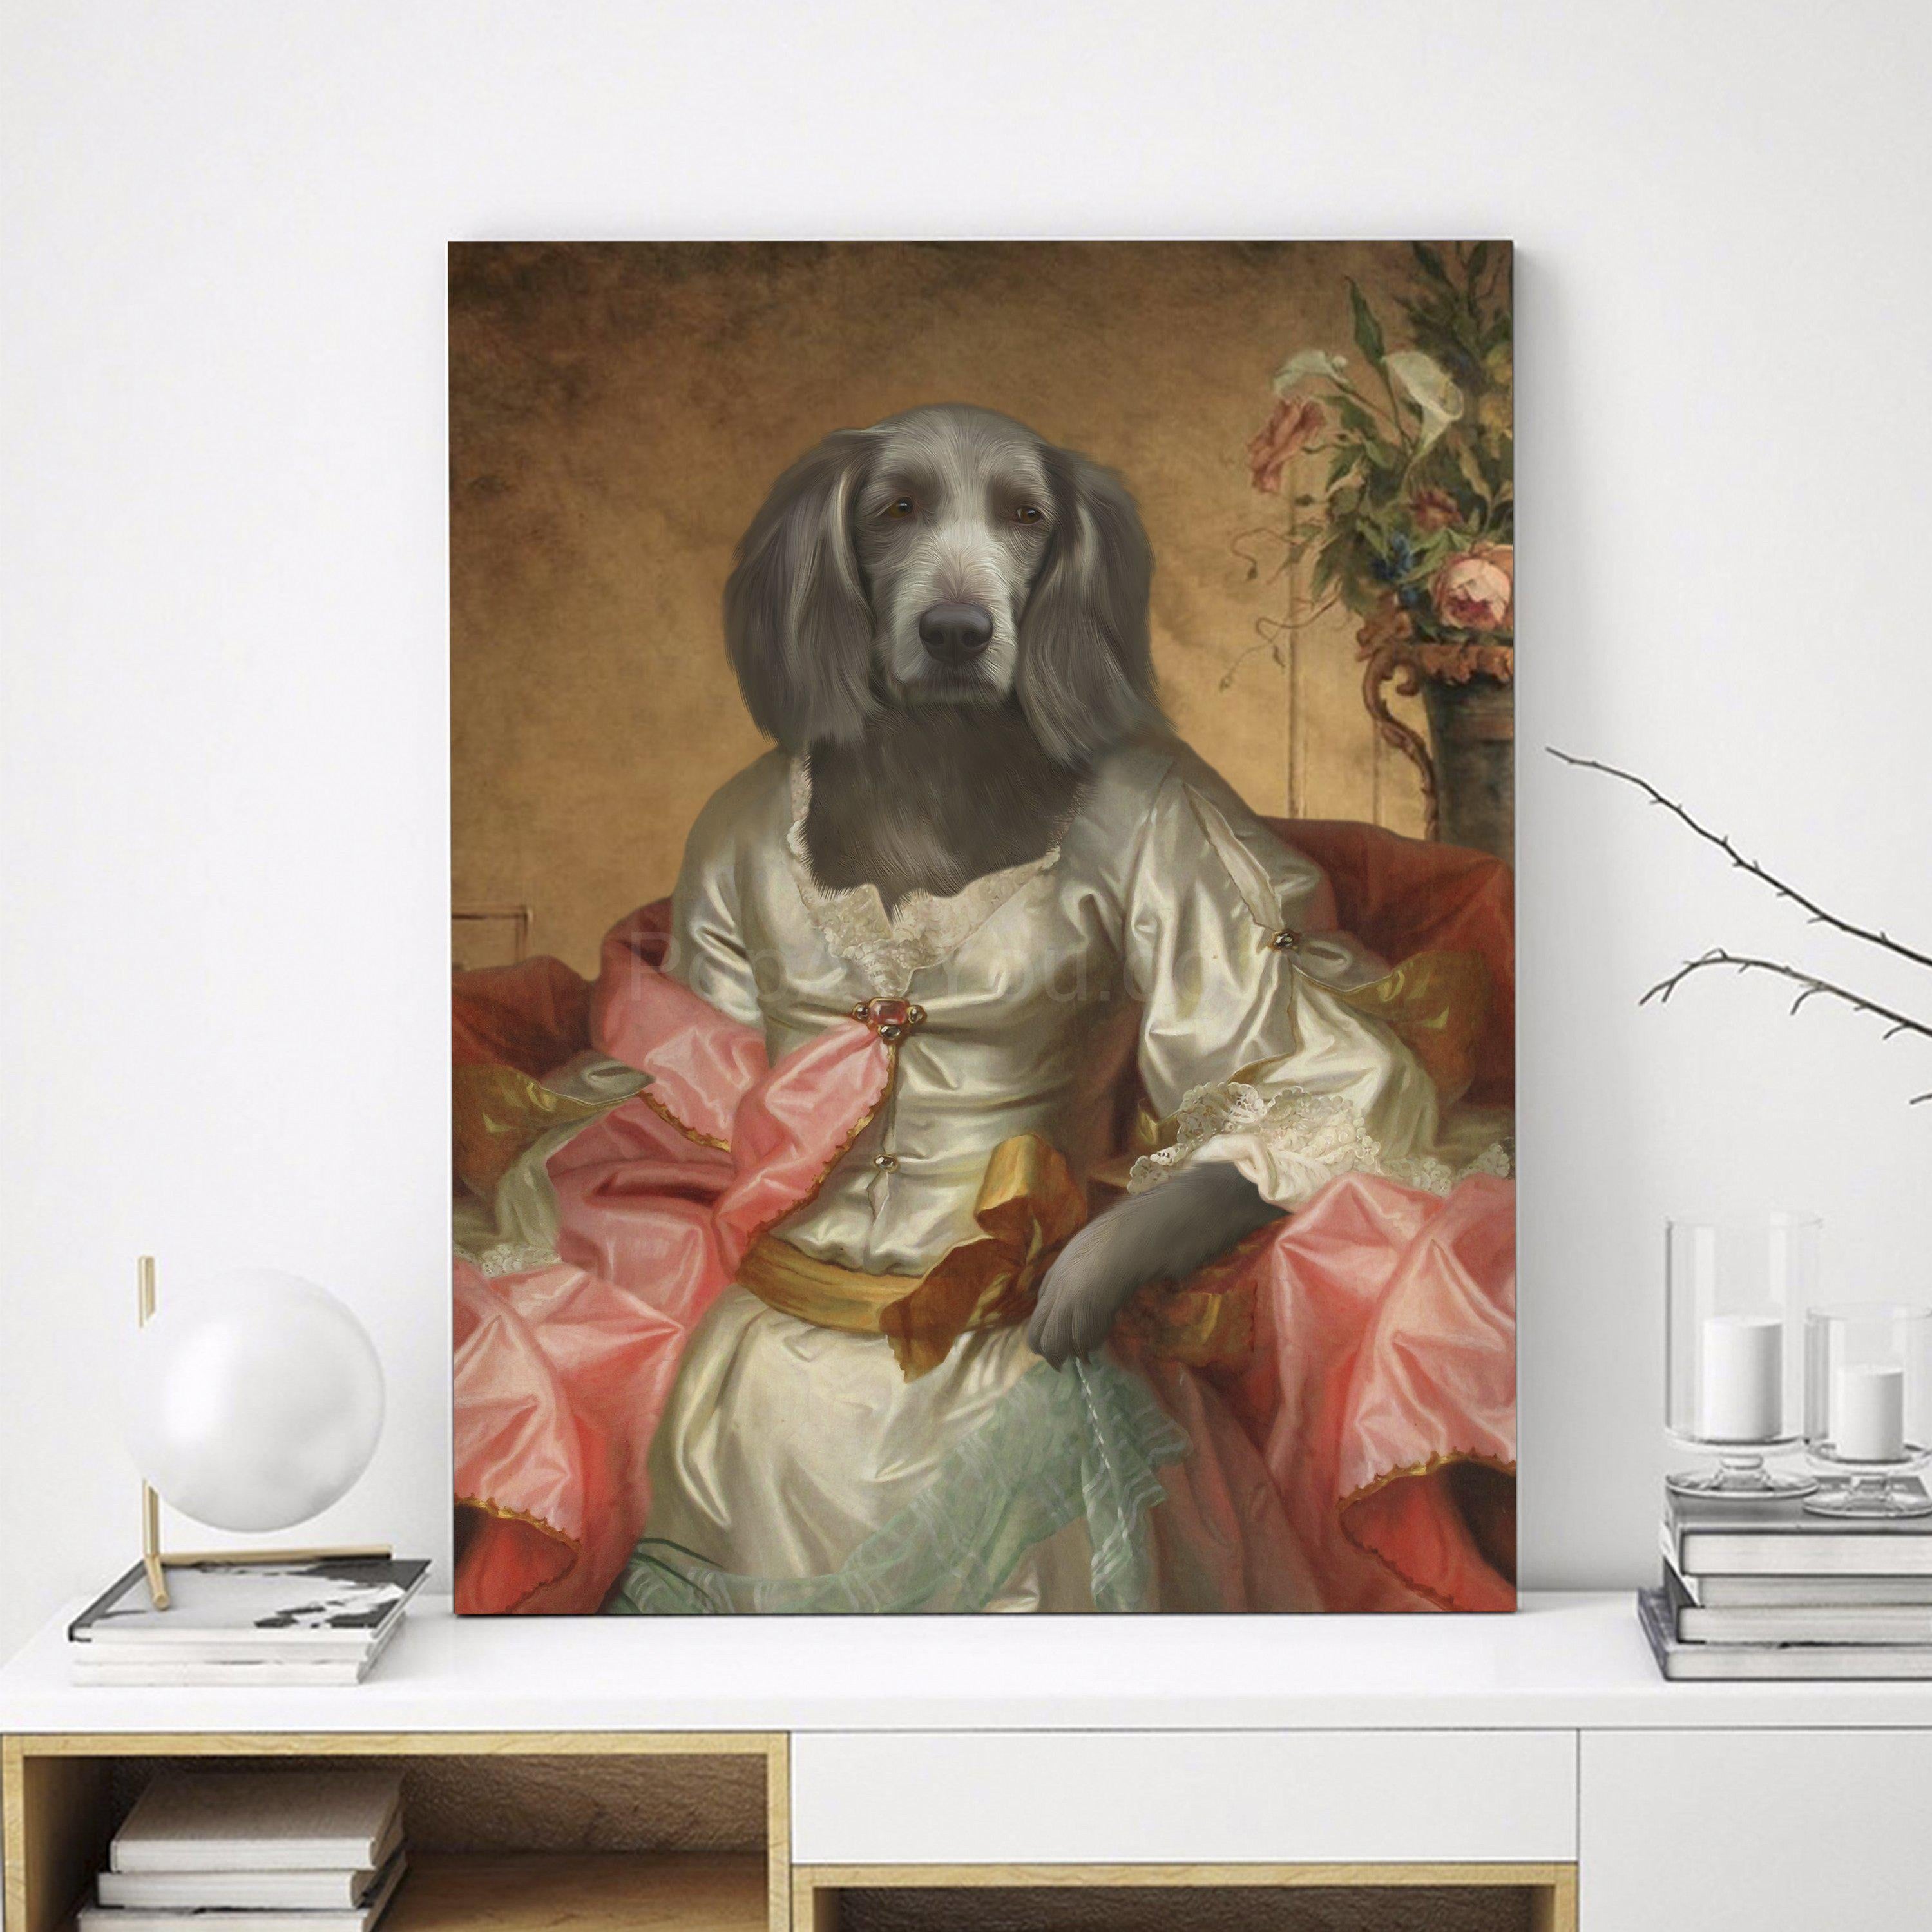 Portrait of a female dog with a human body dressed in a gray royal dress with a pink mantle stands on a white table near books